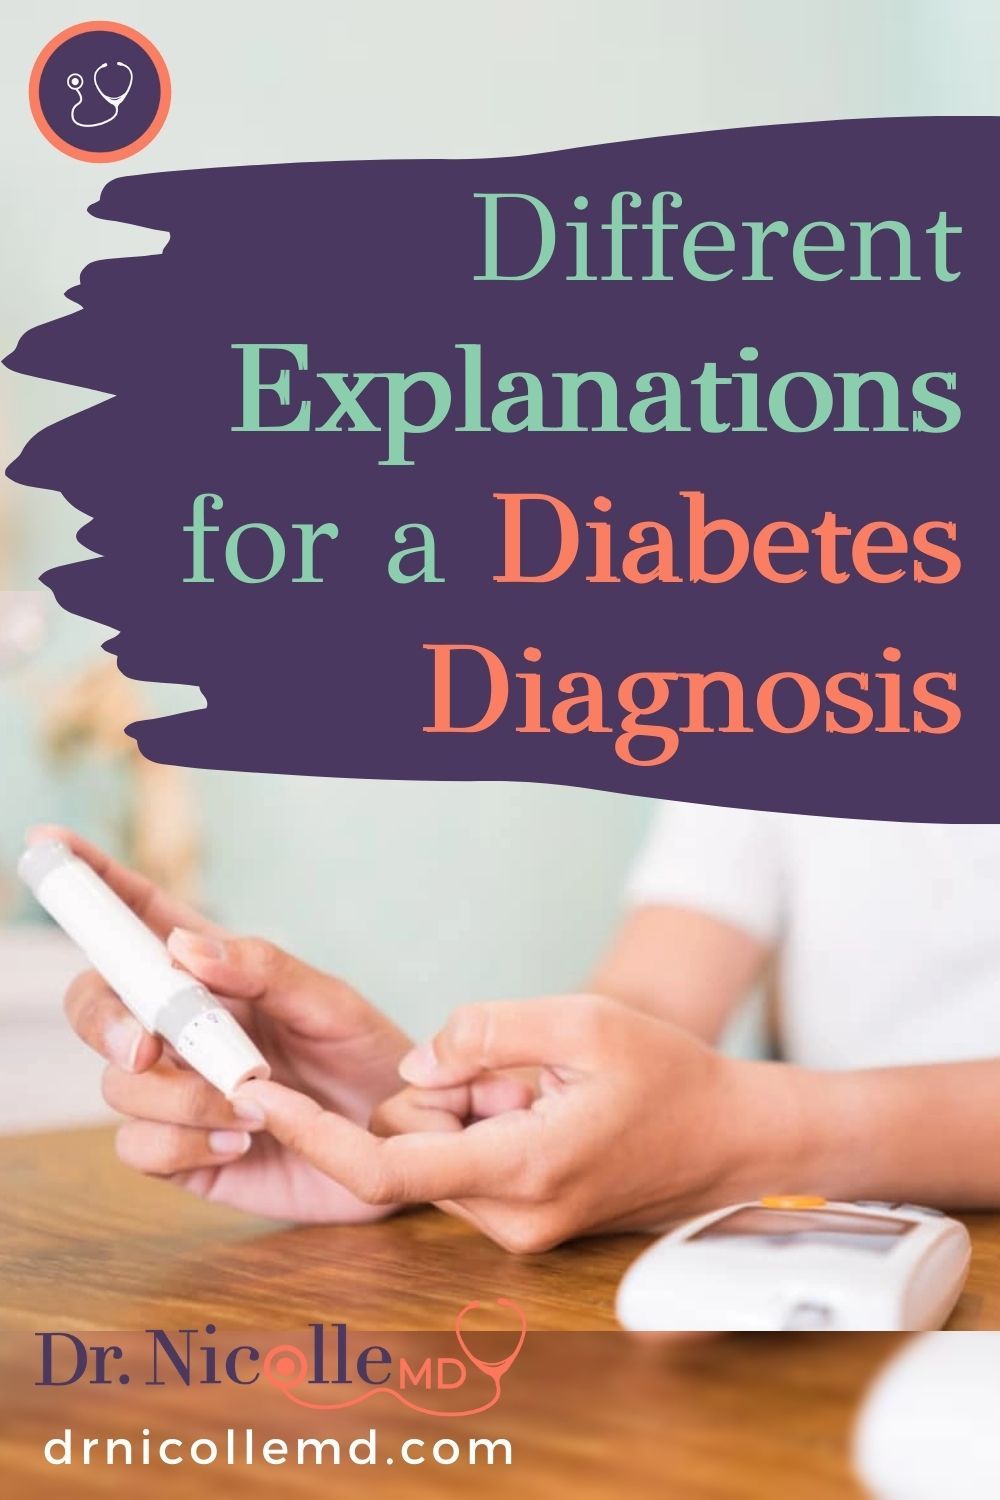 Different Explanations for a Diabetes Diagnosis